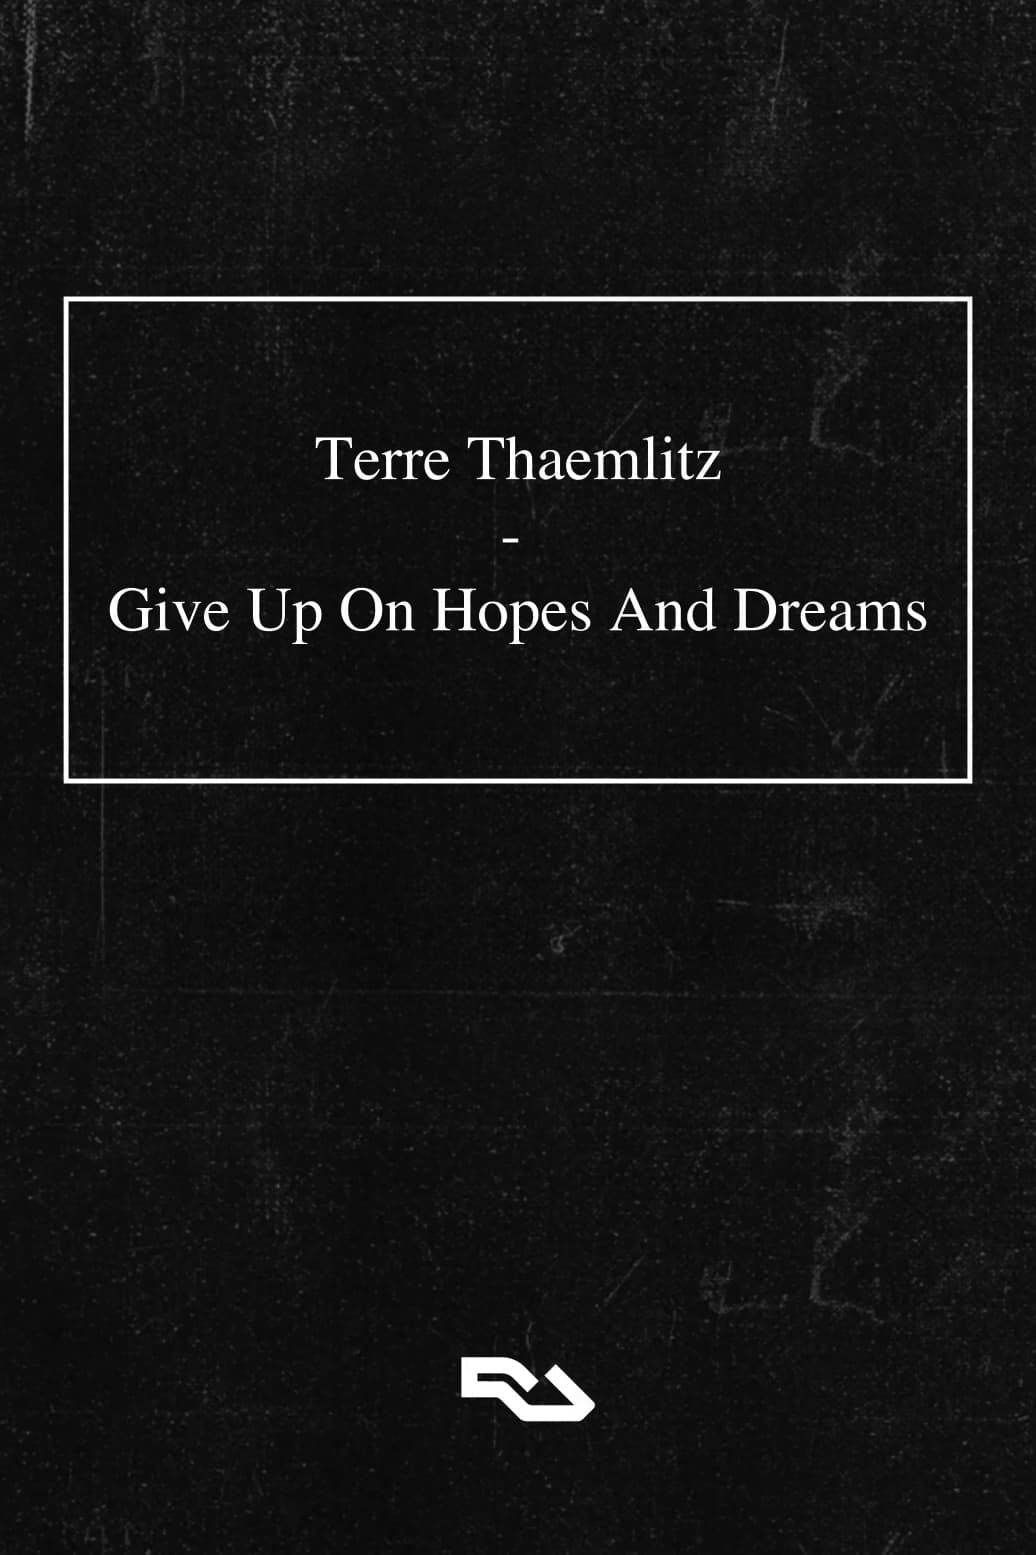 Terre Thaemlitz: Give Up On Hopes And Dreams